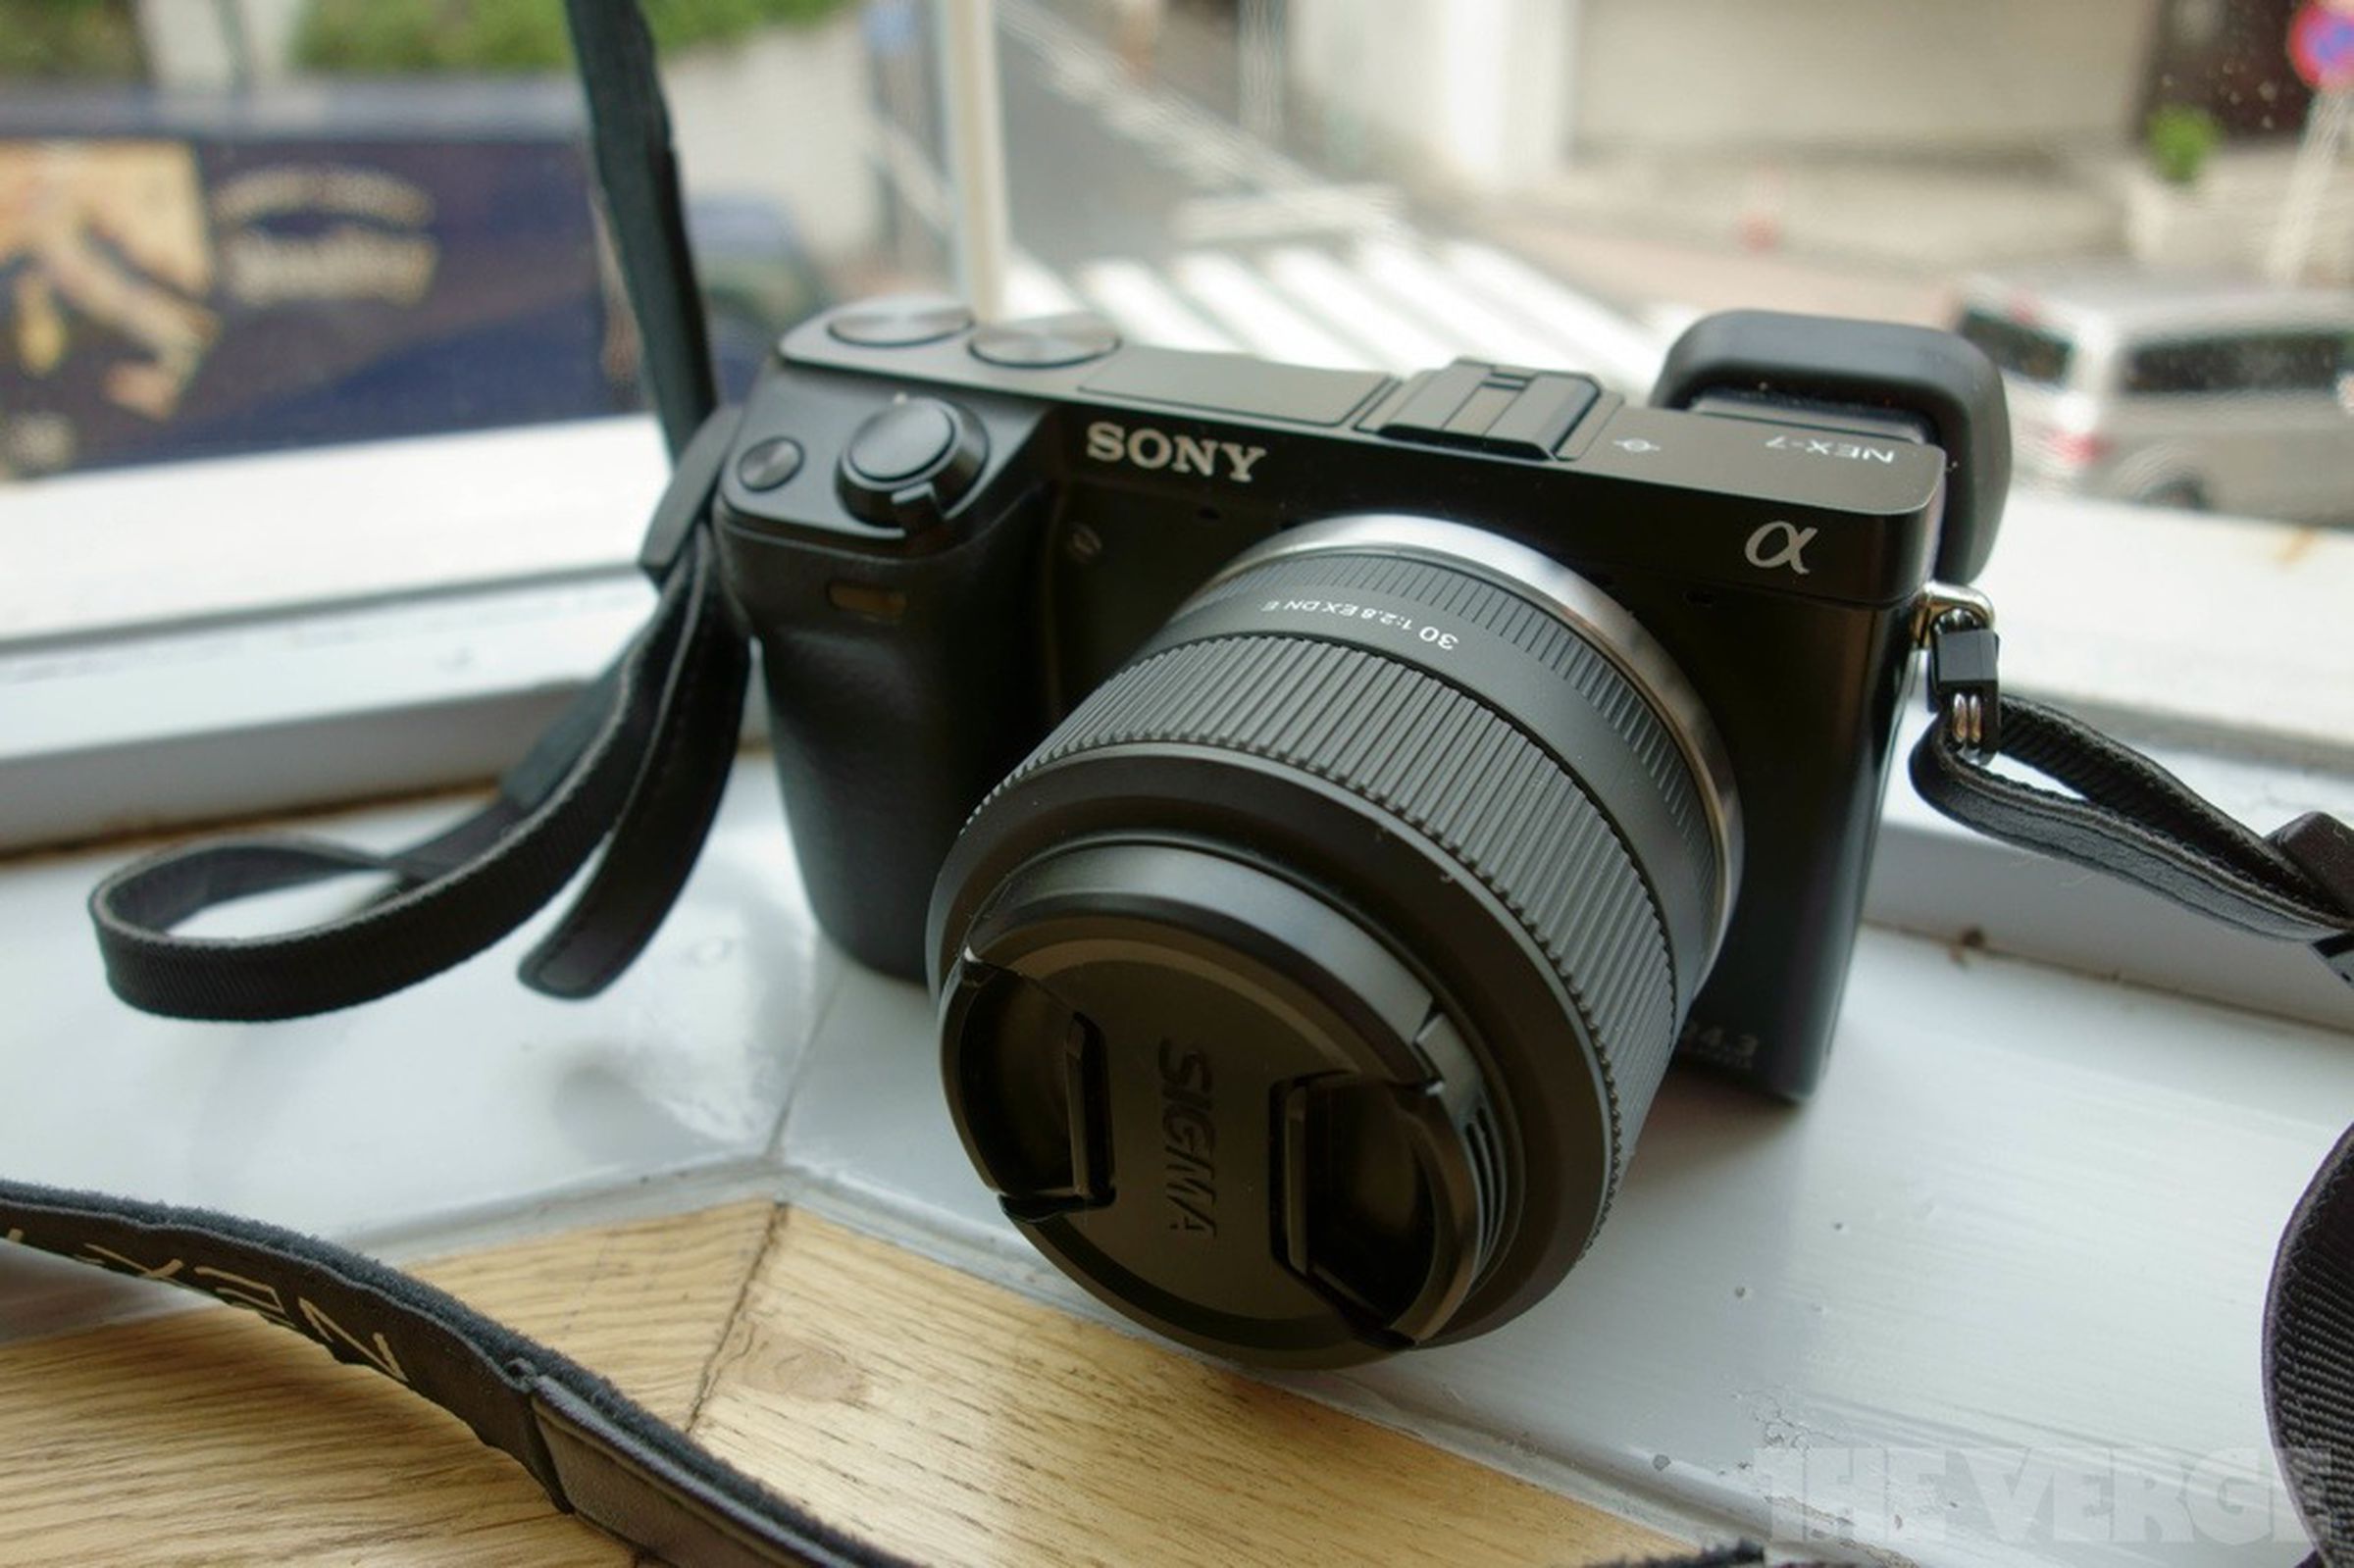 Sony RX100 sample images